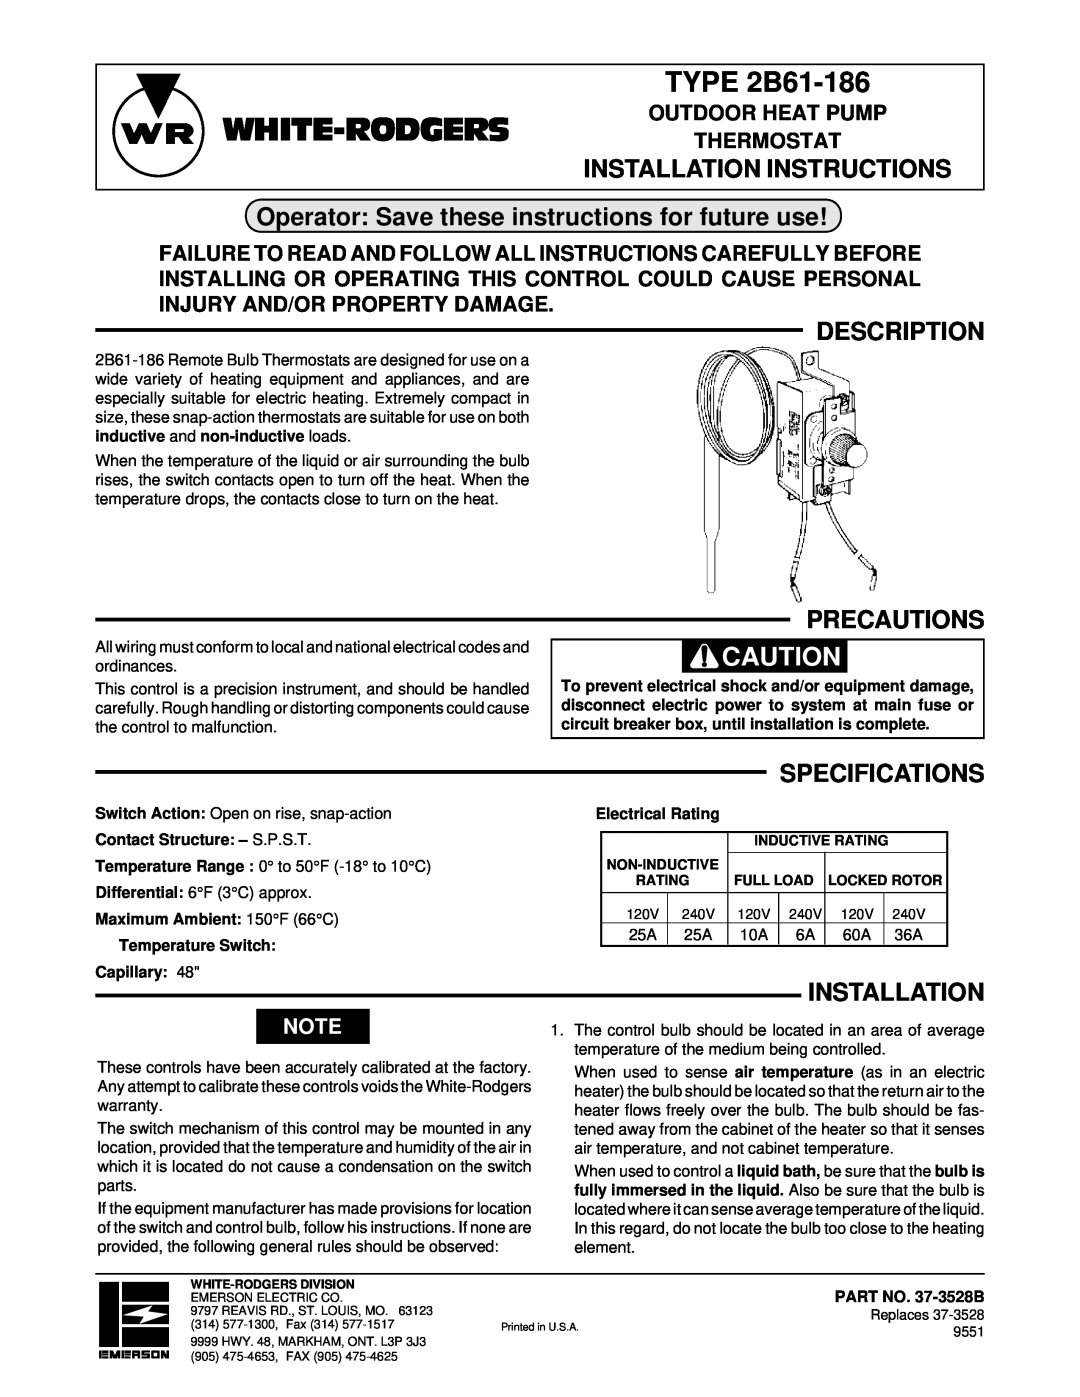 White Rodgers installation instructions White-Rodgers, TYPE 2B61-186, Installation Instructions, Description, Capillary 